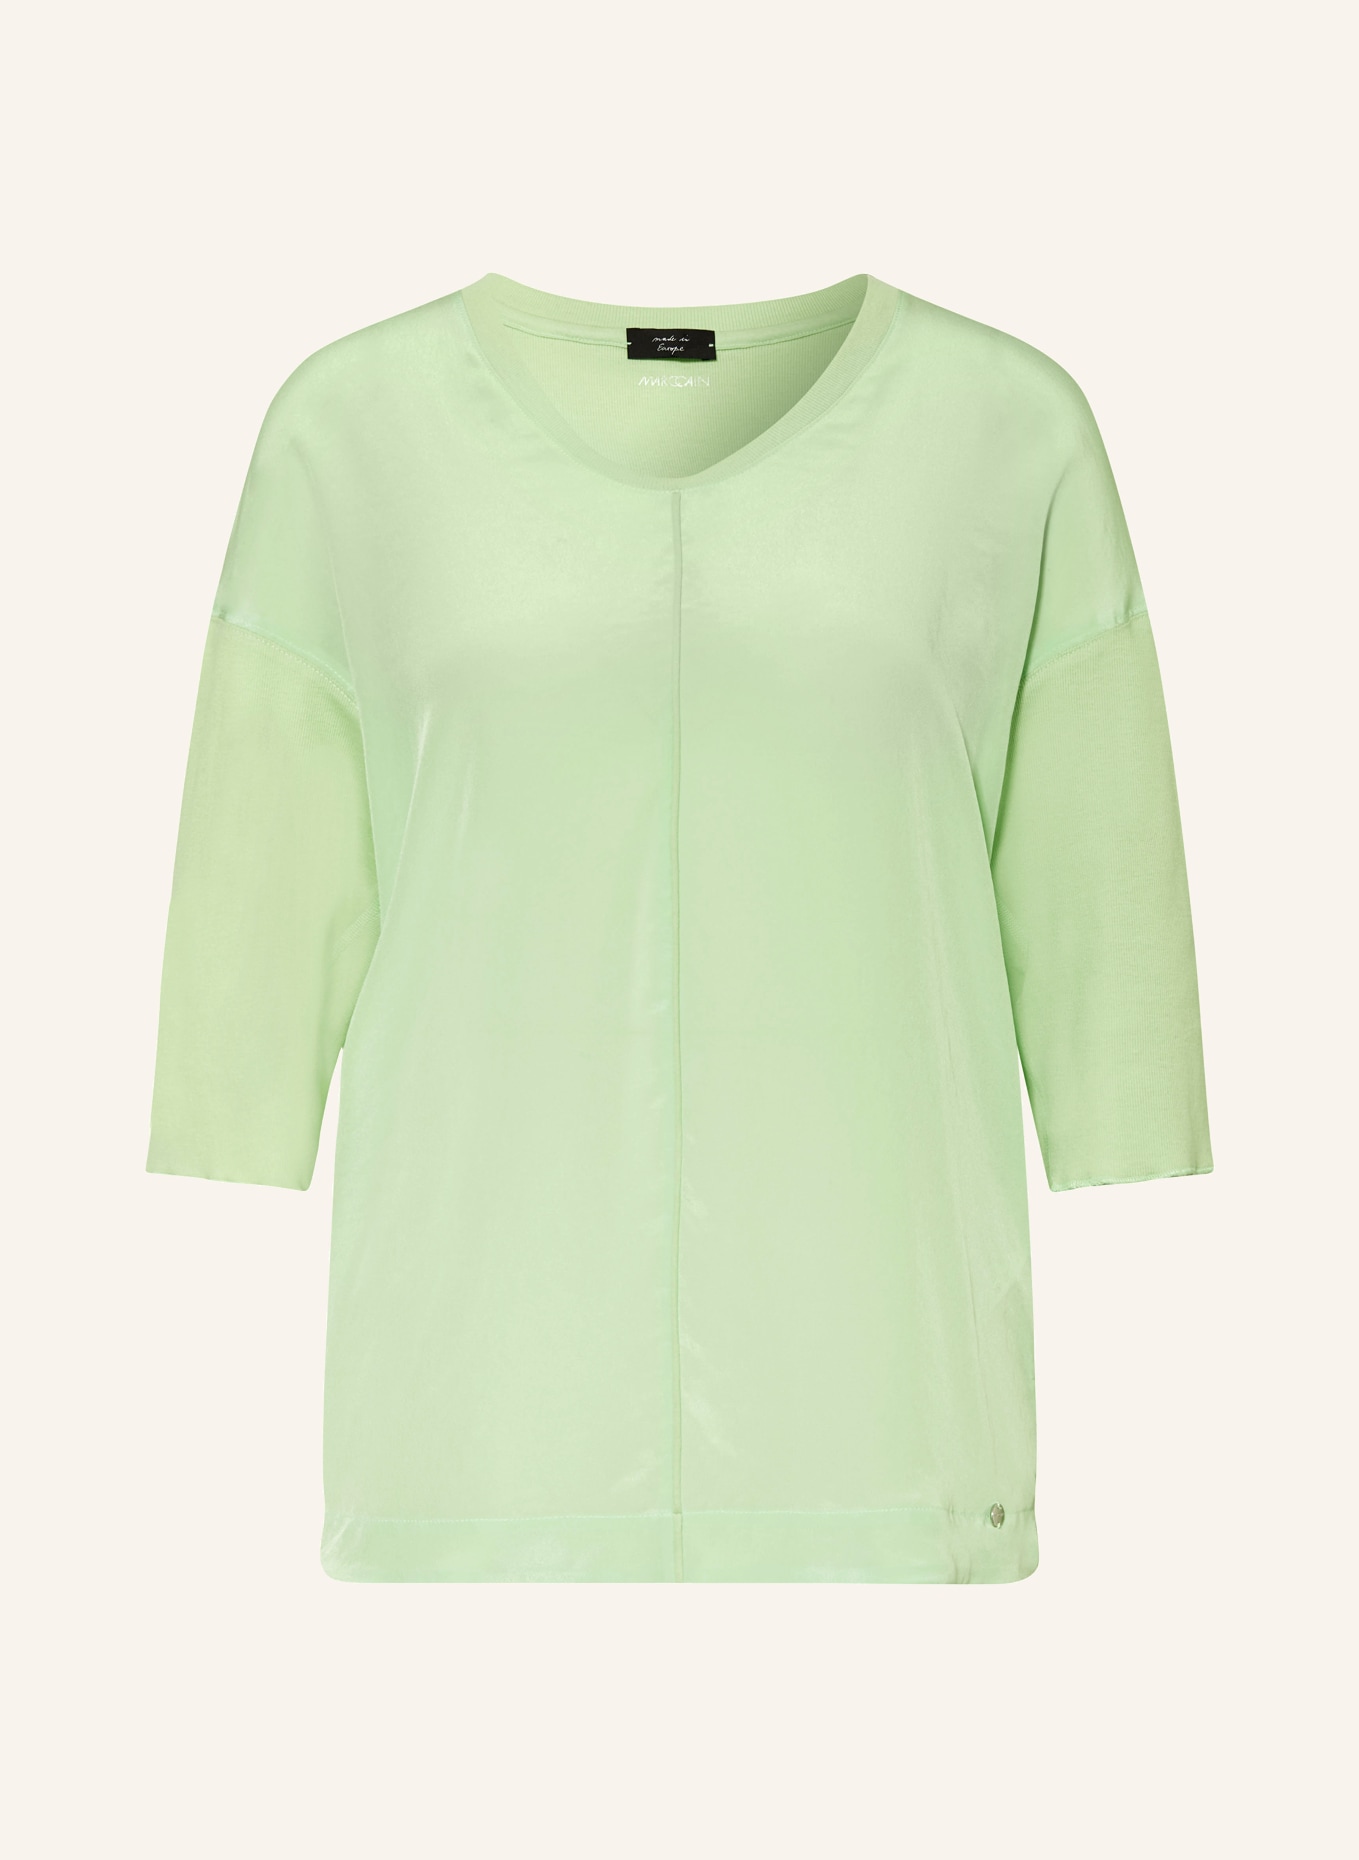 MARC CAIN Shirt blouse in mixed materials, Color: 531 light apple green (Image 1)